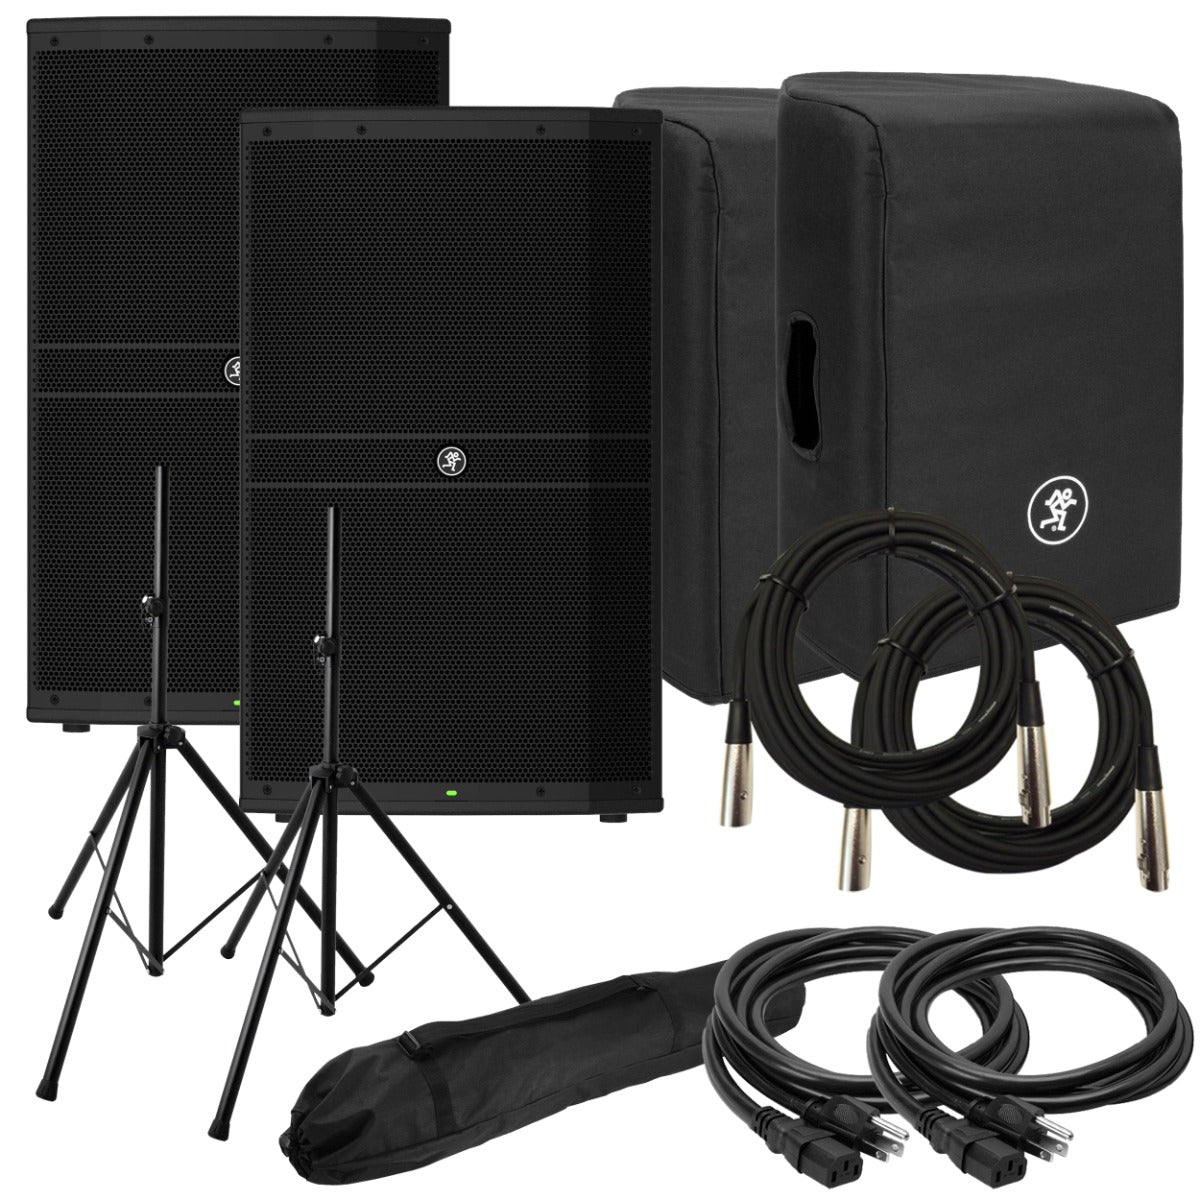 Collage of the Mackie DRM215 Powered Loudspeaker AUDIO ESSENTIALS BUNDLE showing included components